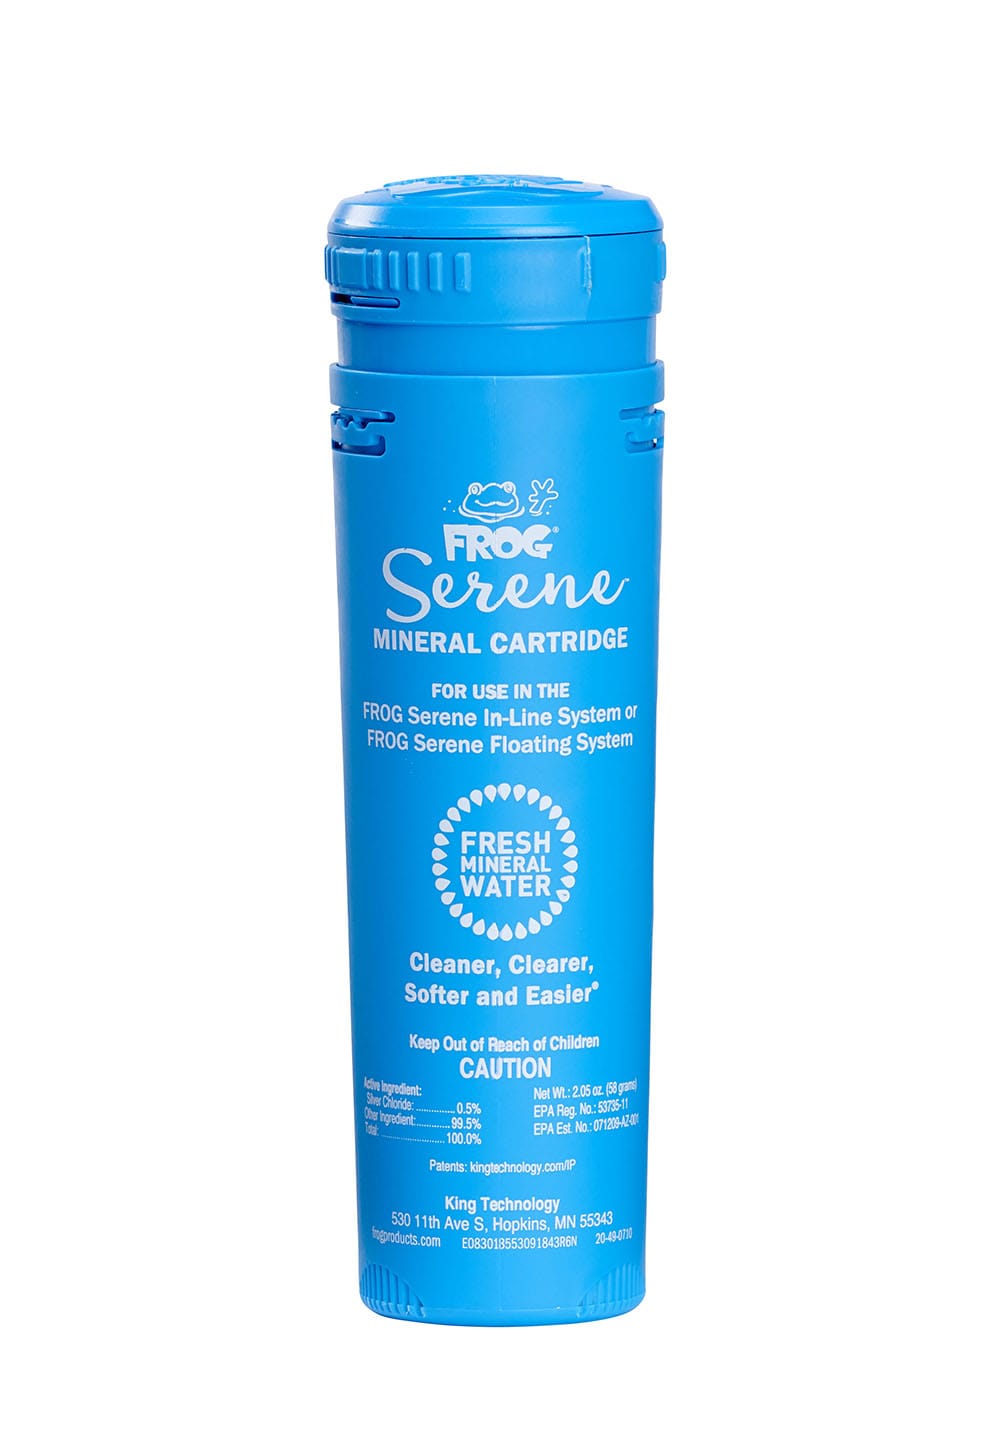 SPA FROG Serene Mineral Cartridge for Hot Tub - Blue - Lasts 4 Months!